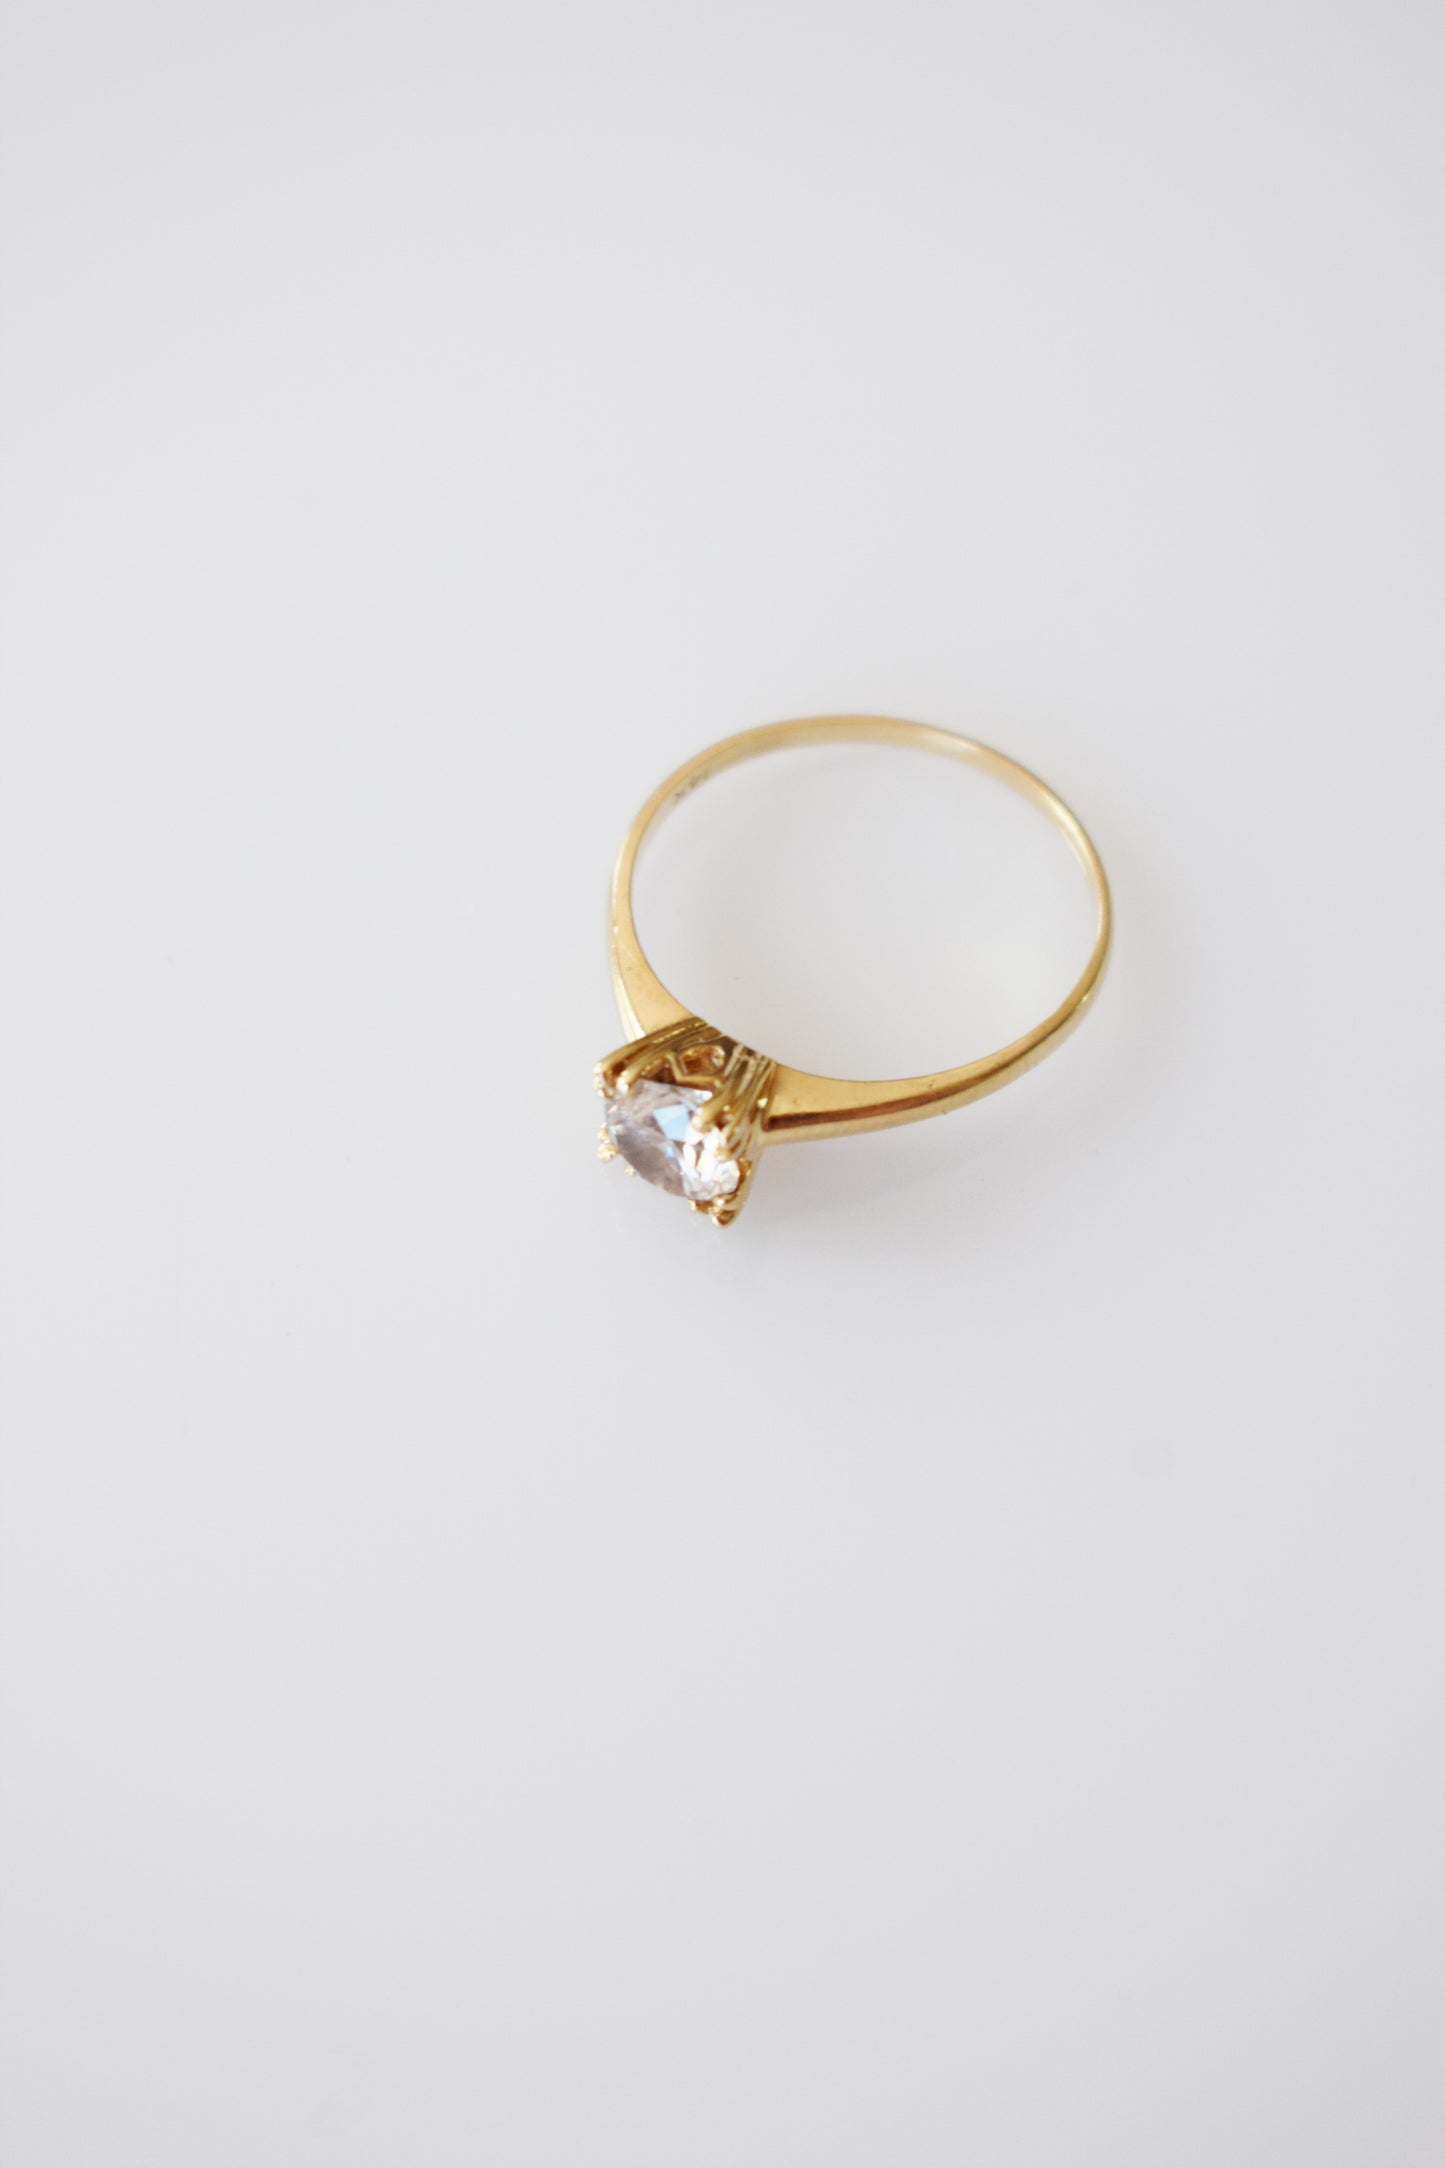 Vintage Art Deco 14kt Gold and Crystal Solitaire Ring | US 7.25